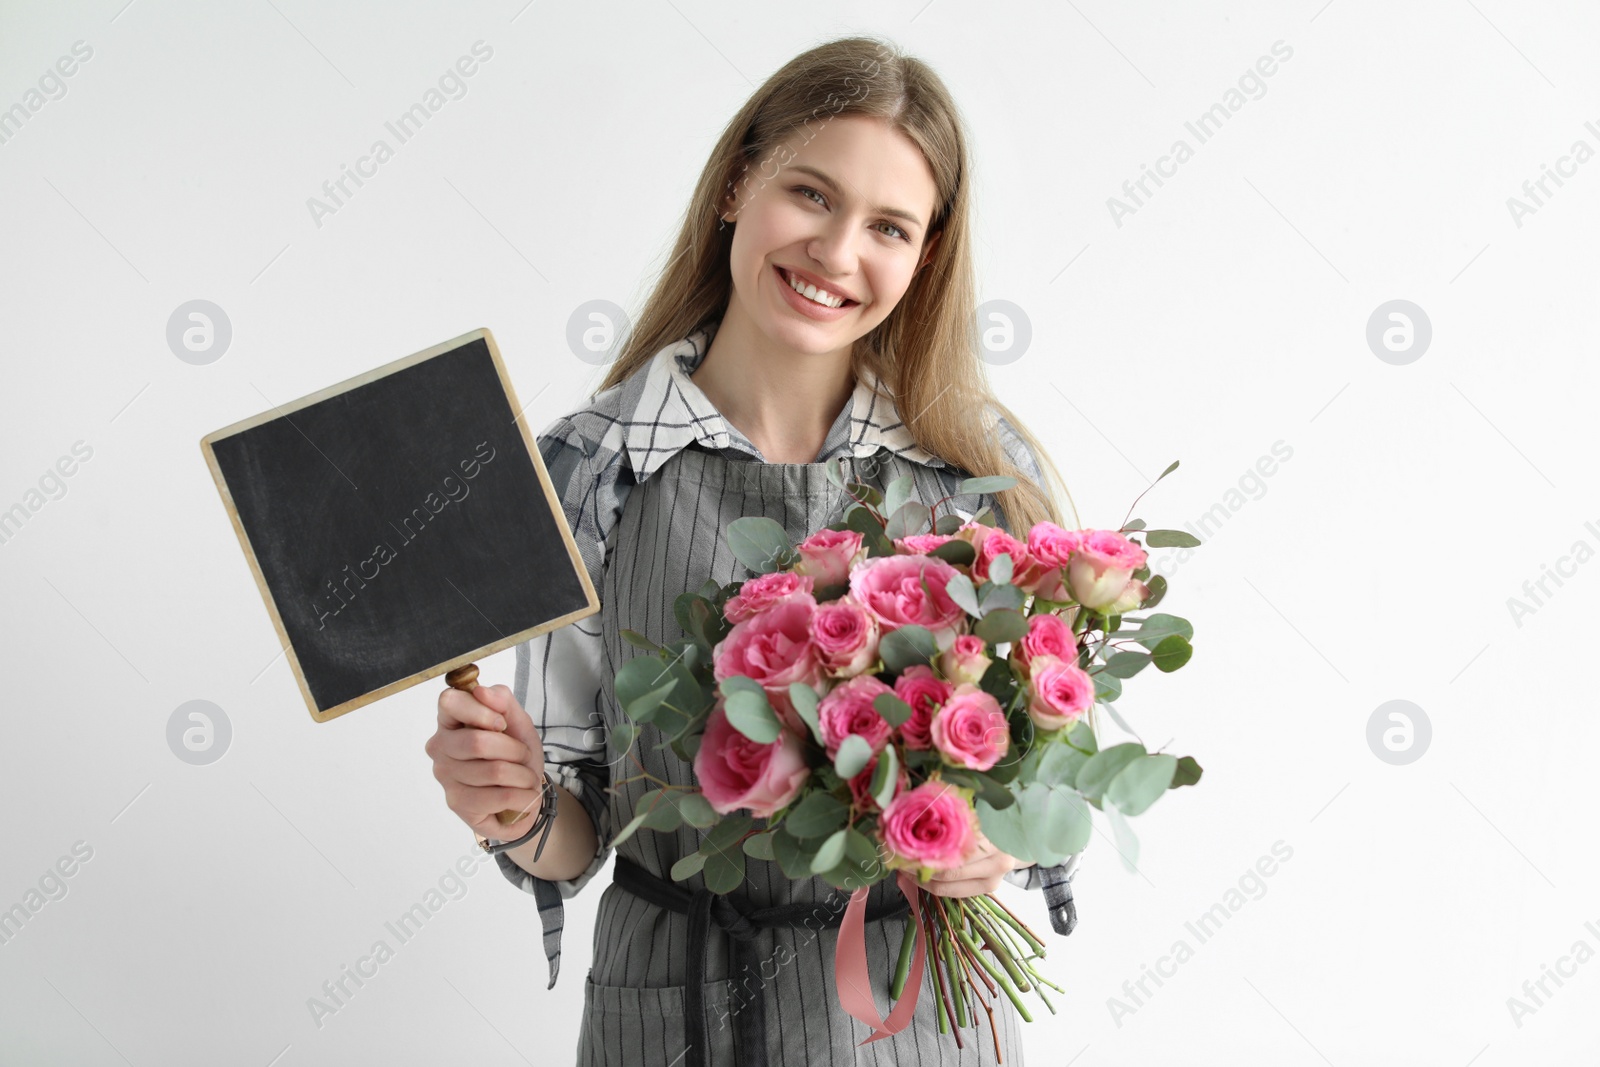 Photo of Female florist holding small chalkboard and bouquet on light background